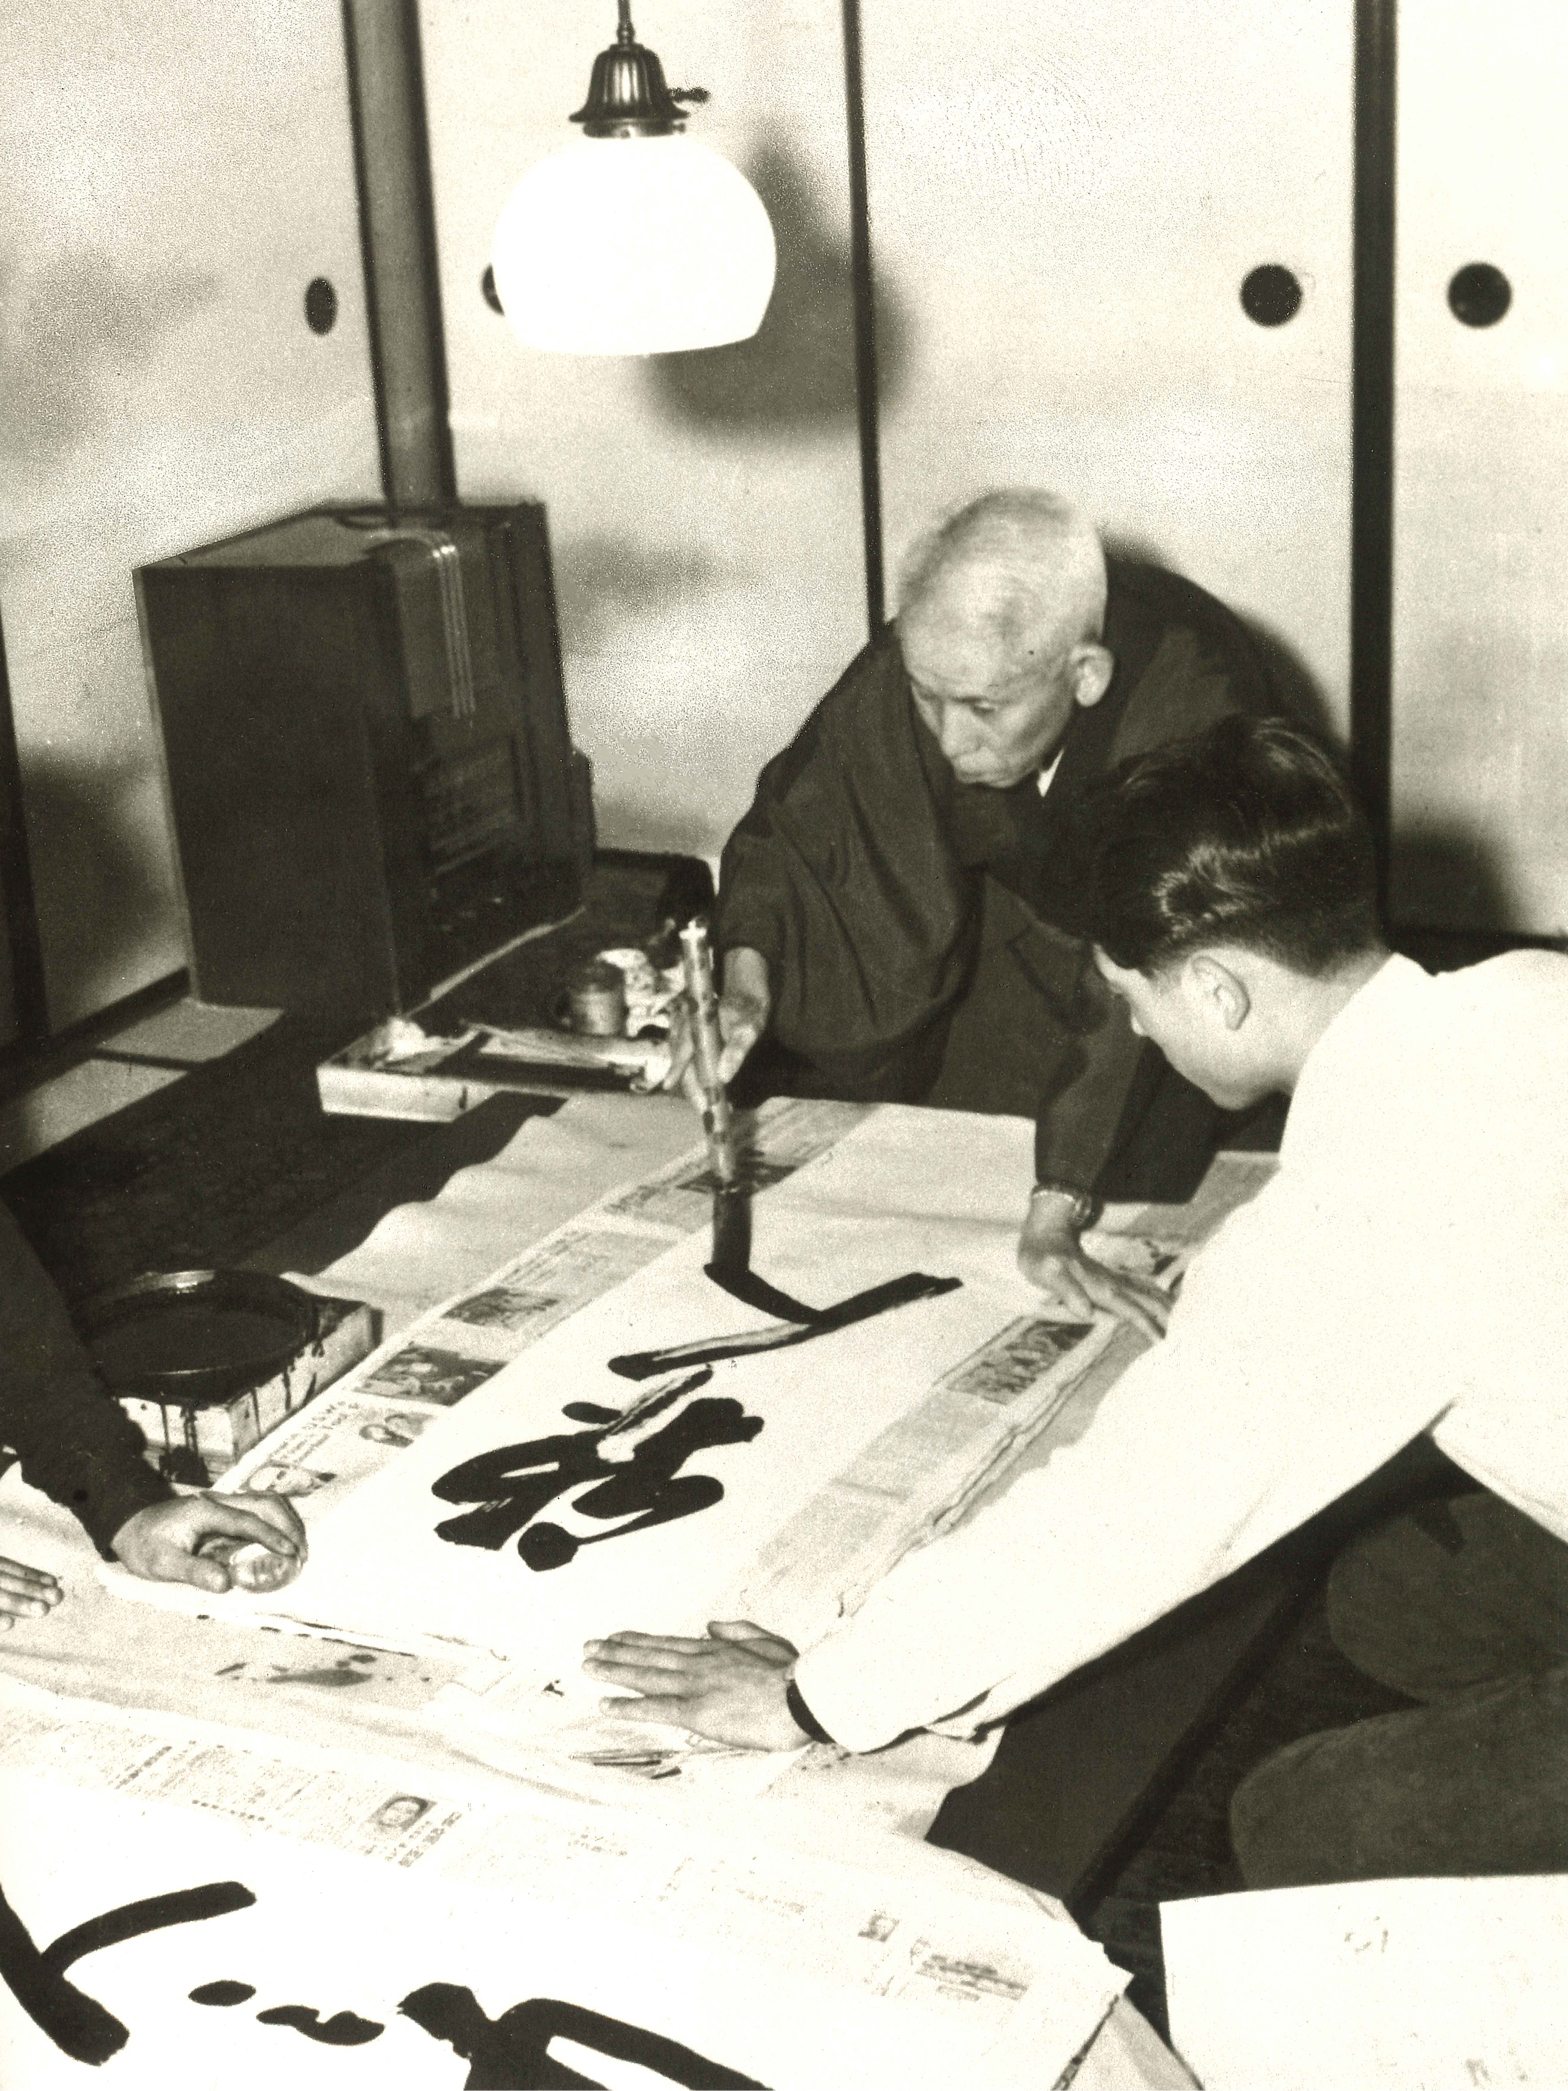 Writing calligraphy with a superhuman speed with the help of those who served Meishu-sama closely. (May 1949, Shimizu-cho Betsu-in, Atami City)